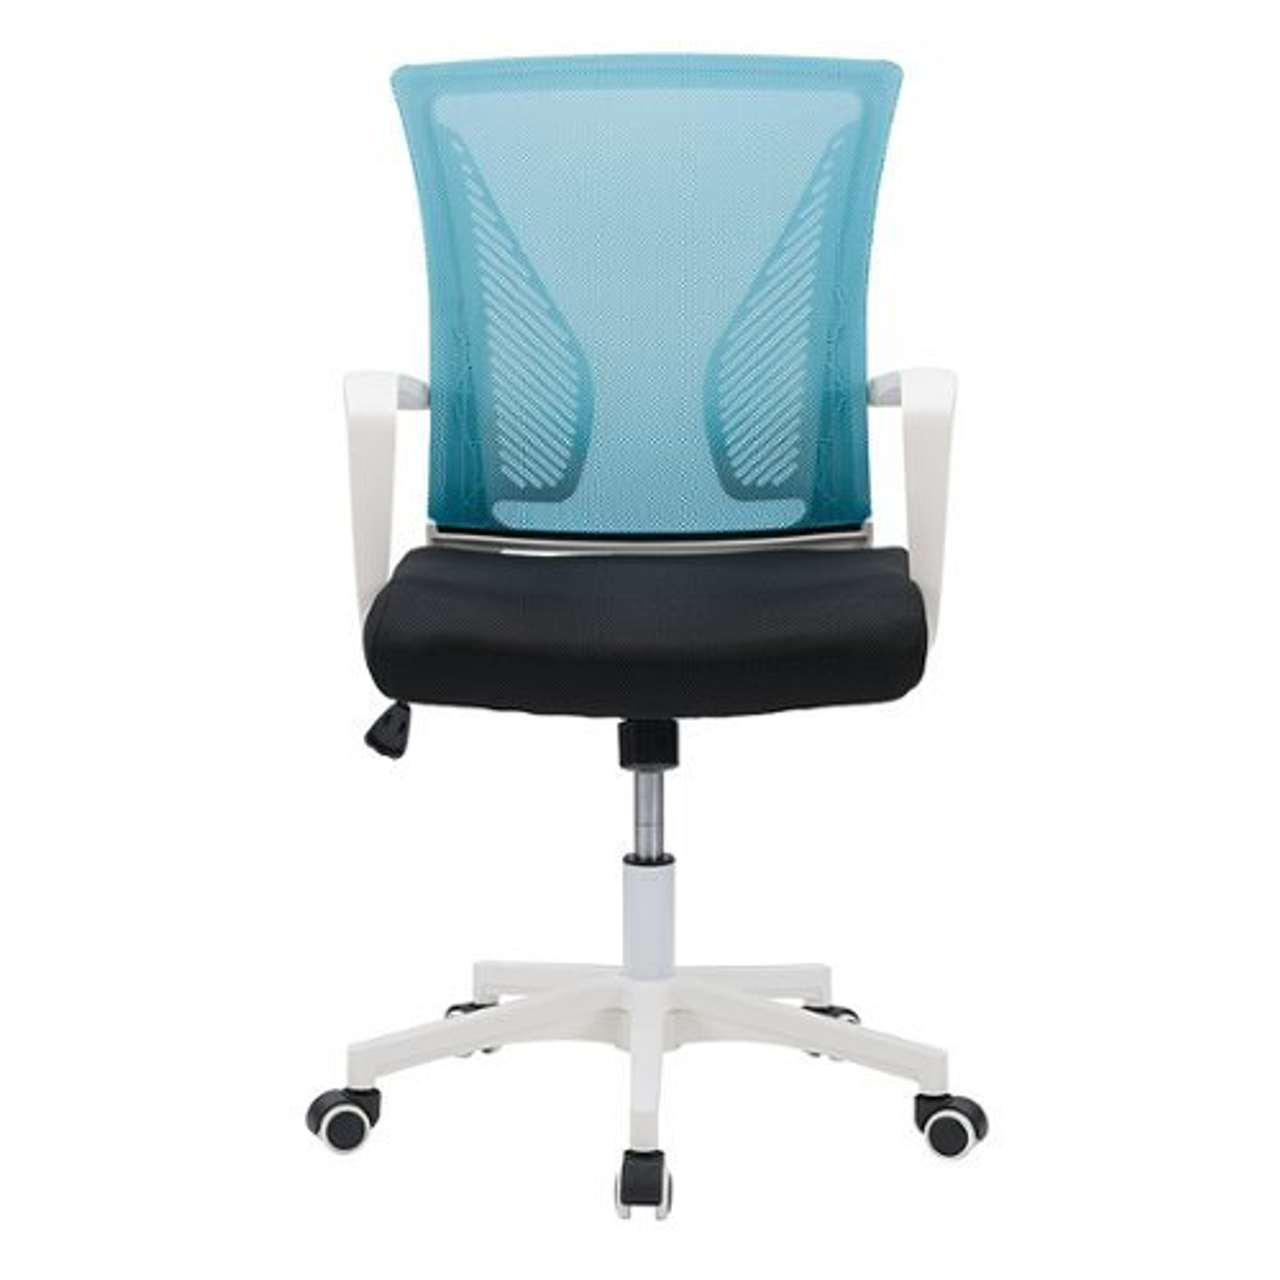 CorLiving Workspace Ergonomic Teal Mesh Back Office Chair - Teal and White